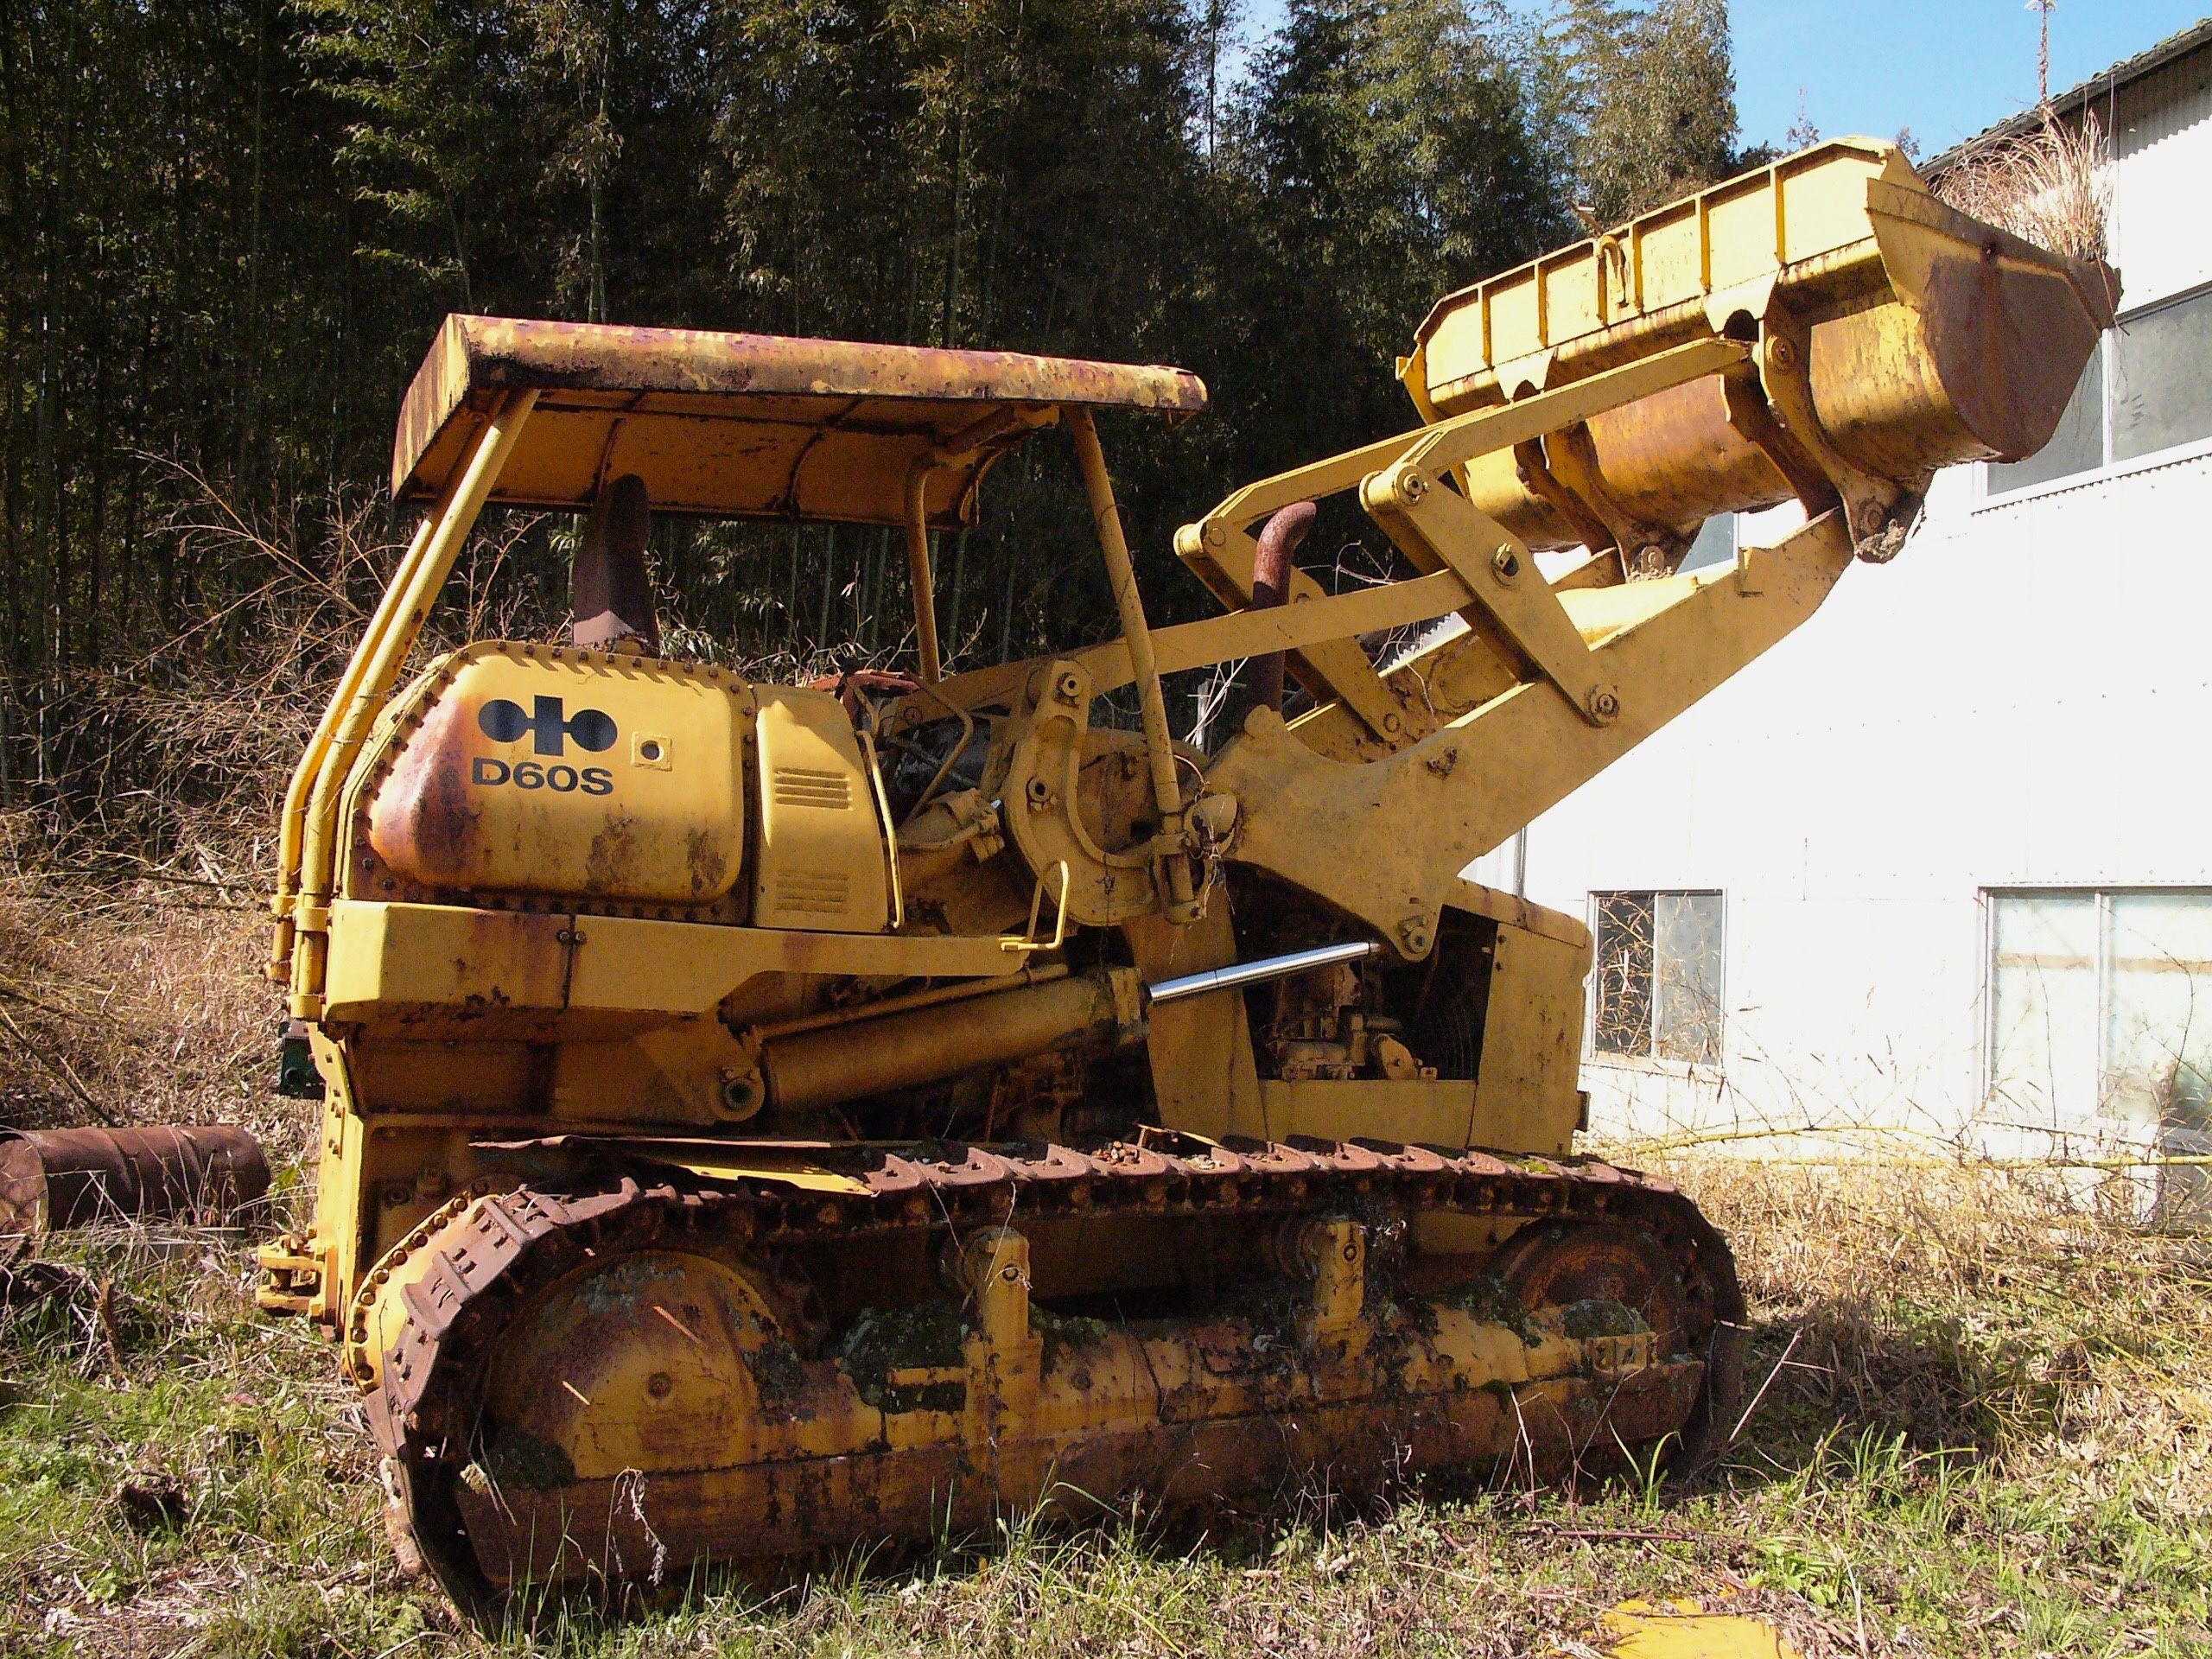 A small yellow excavator.